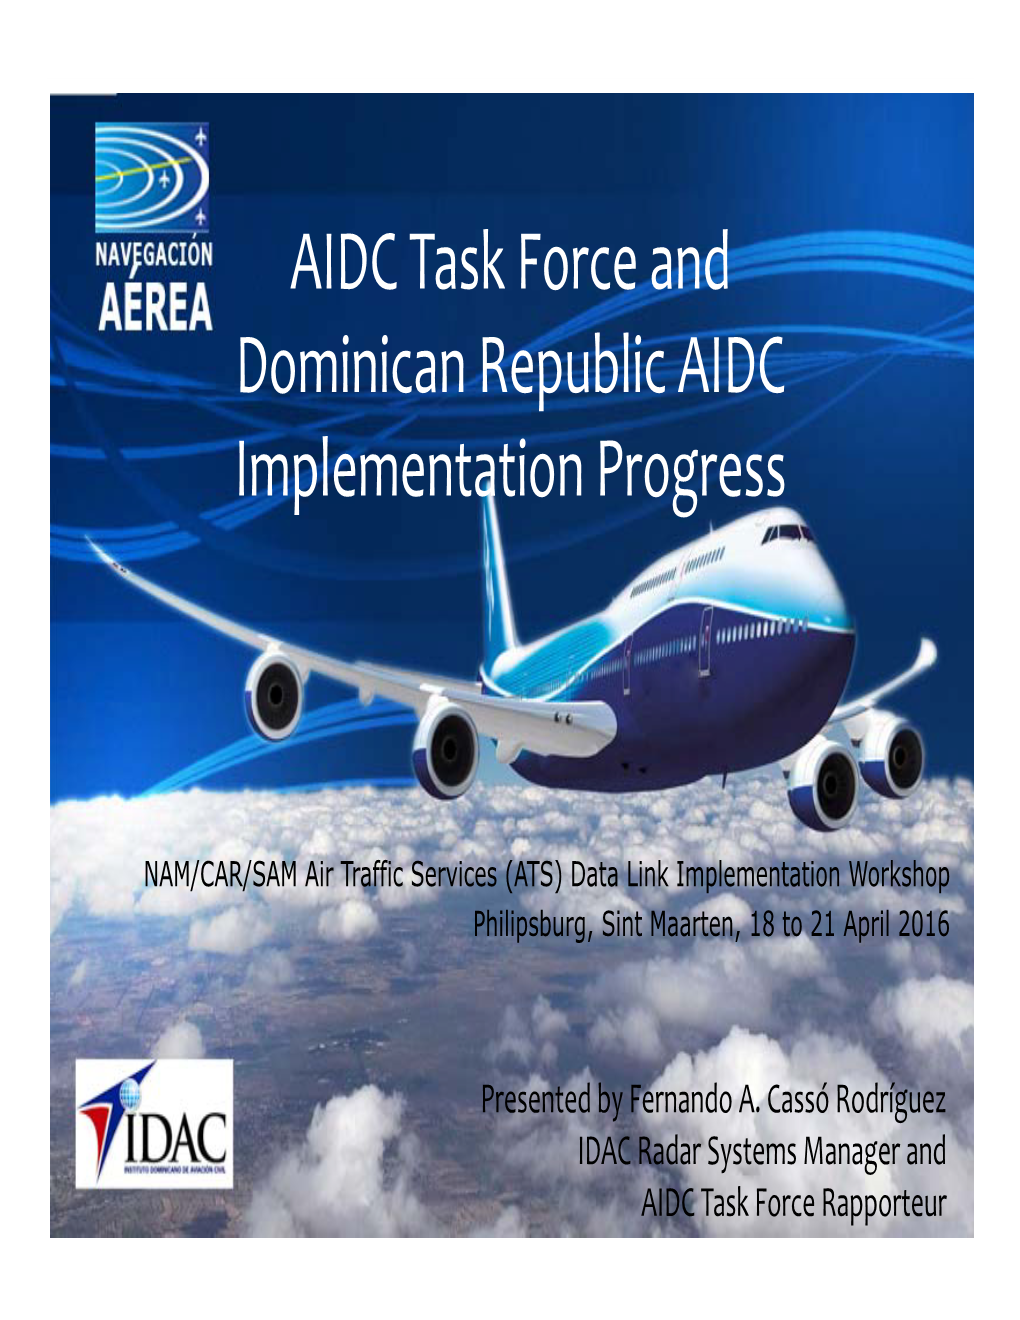 AIDC Task Force and Dominican Republic AIDC Implementation Progress